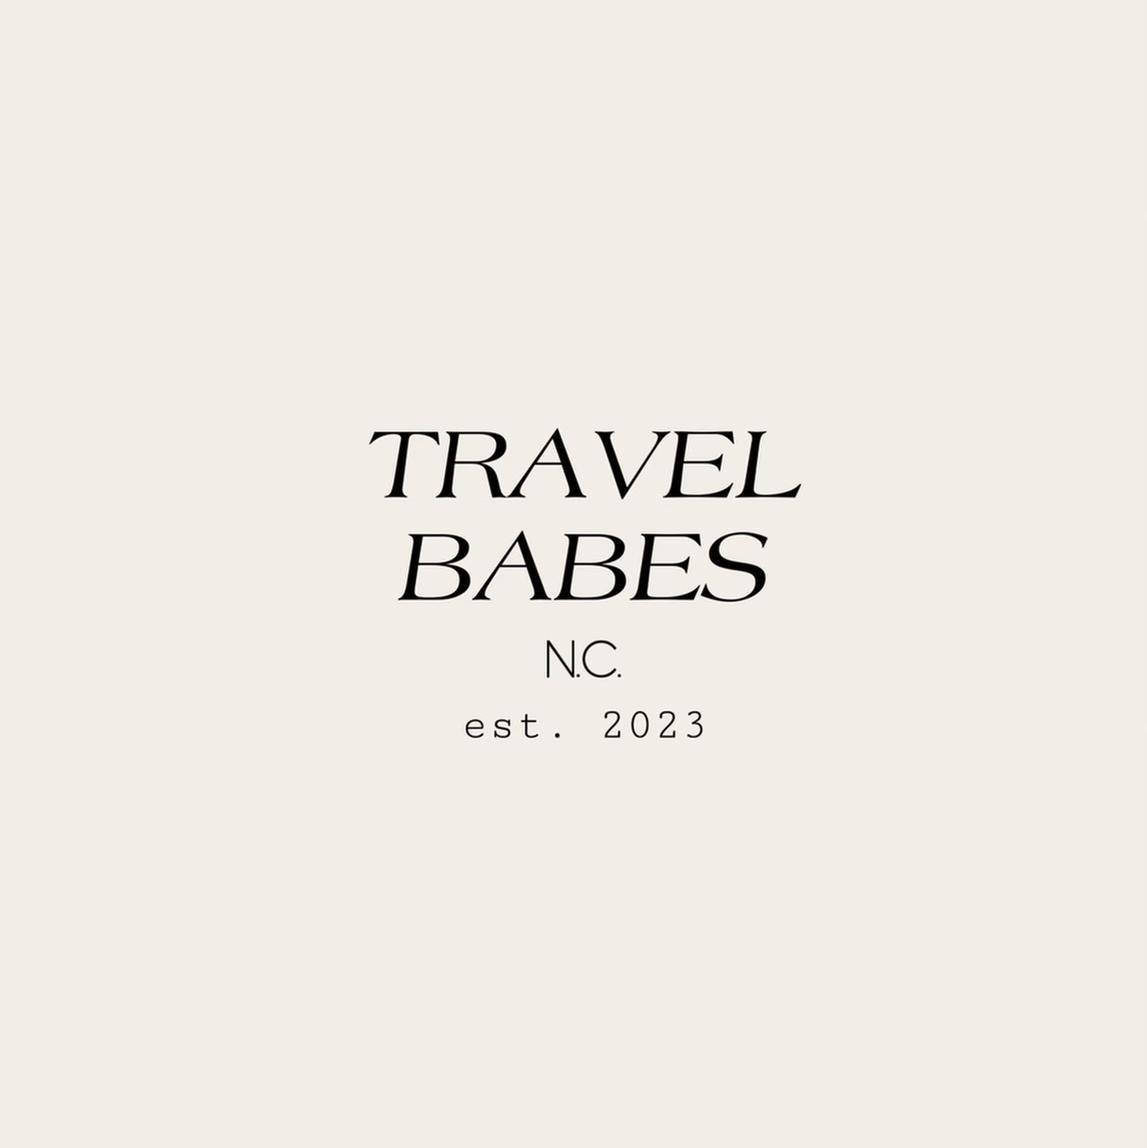 Travel Babes NC's images